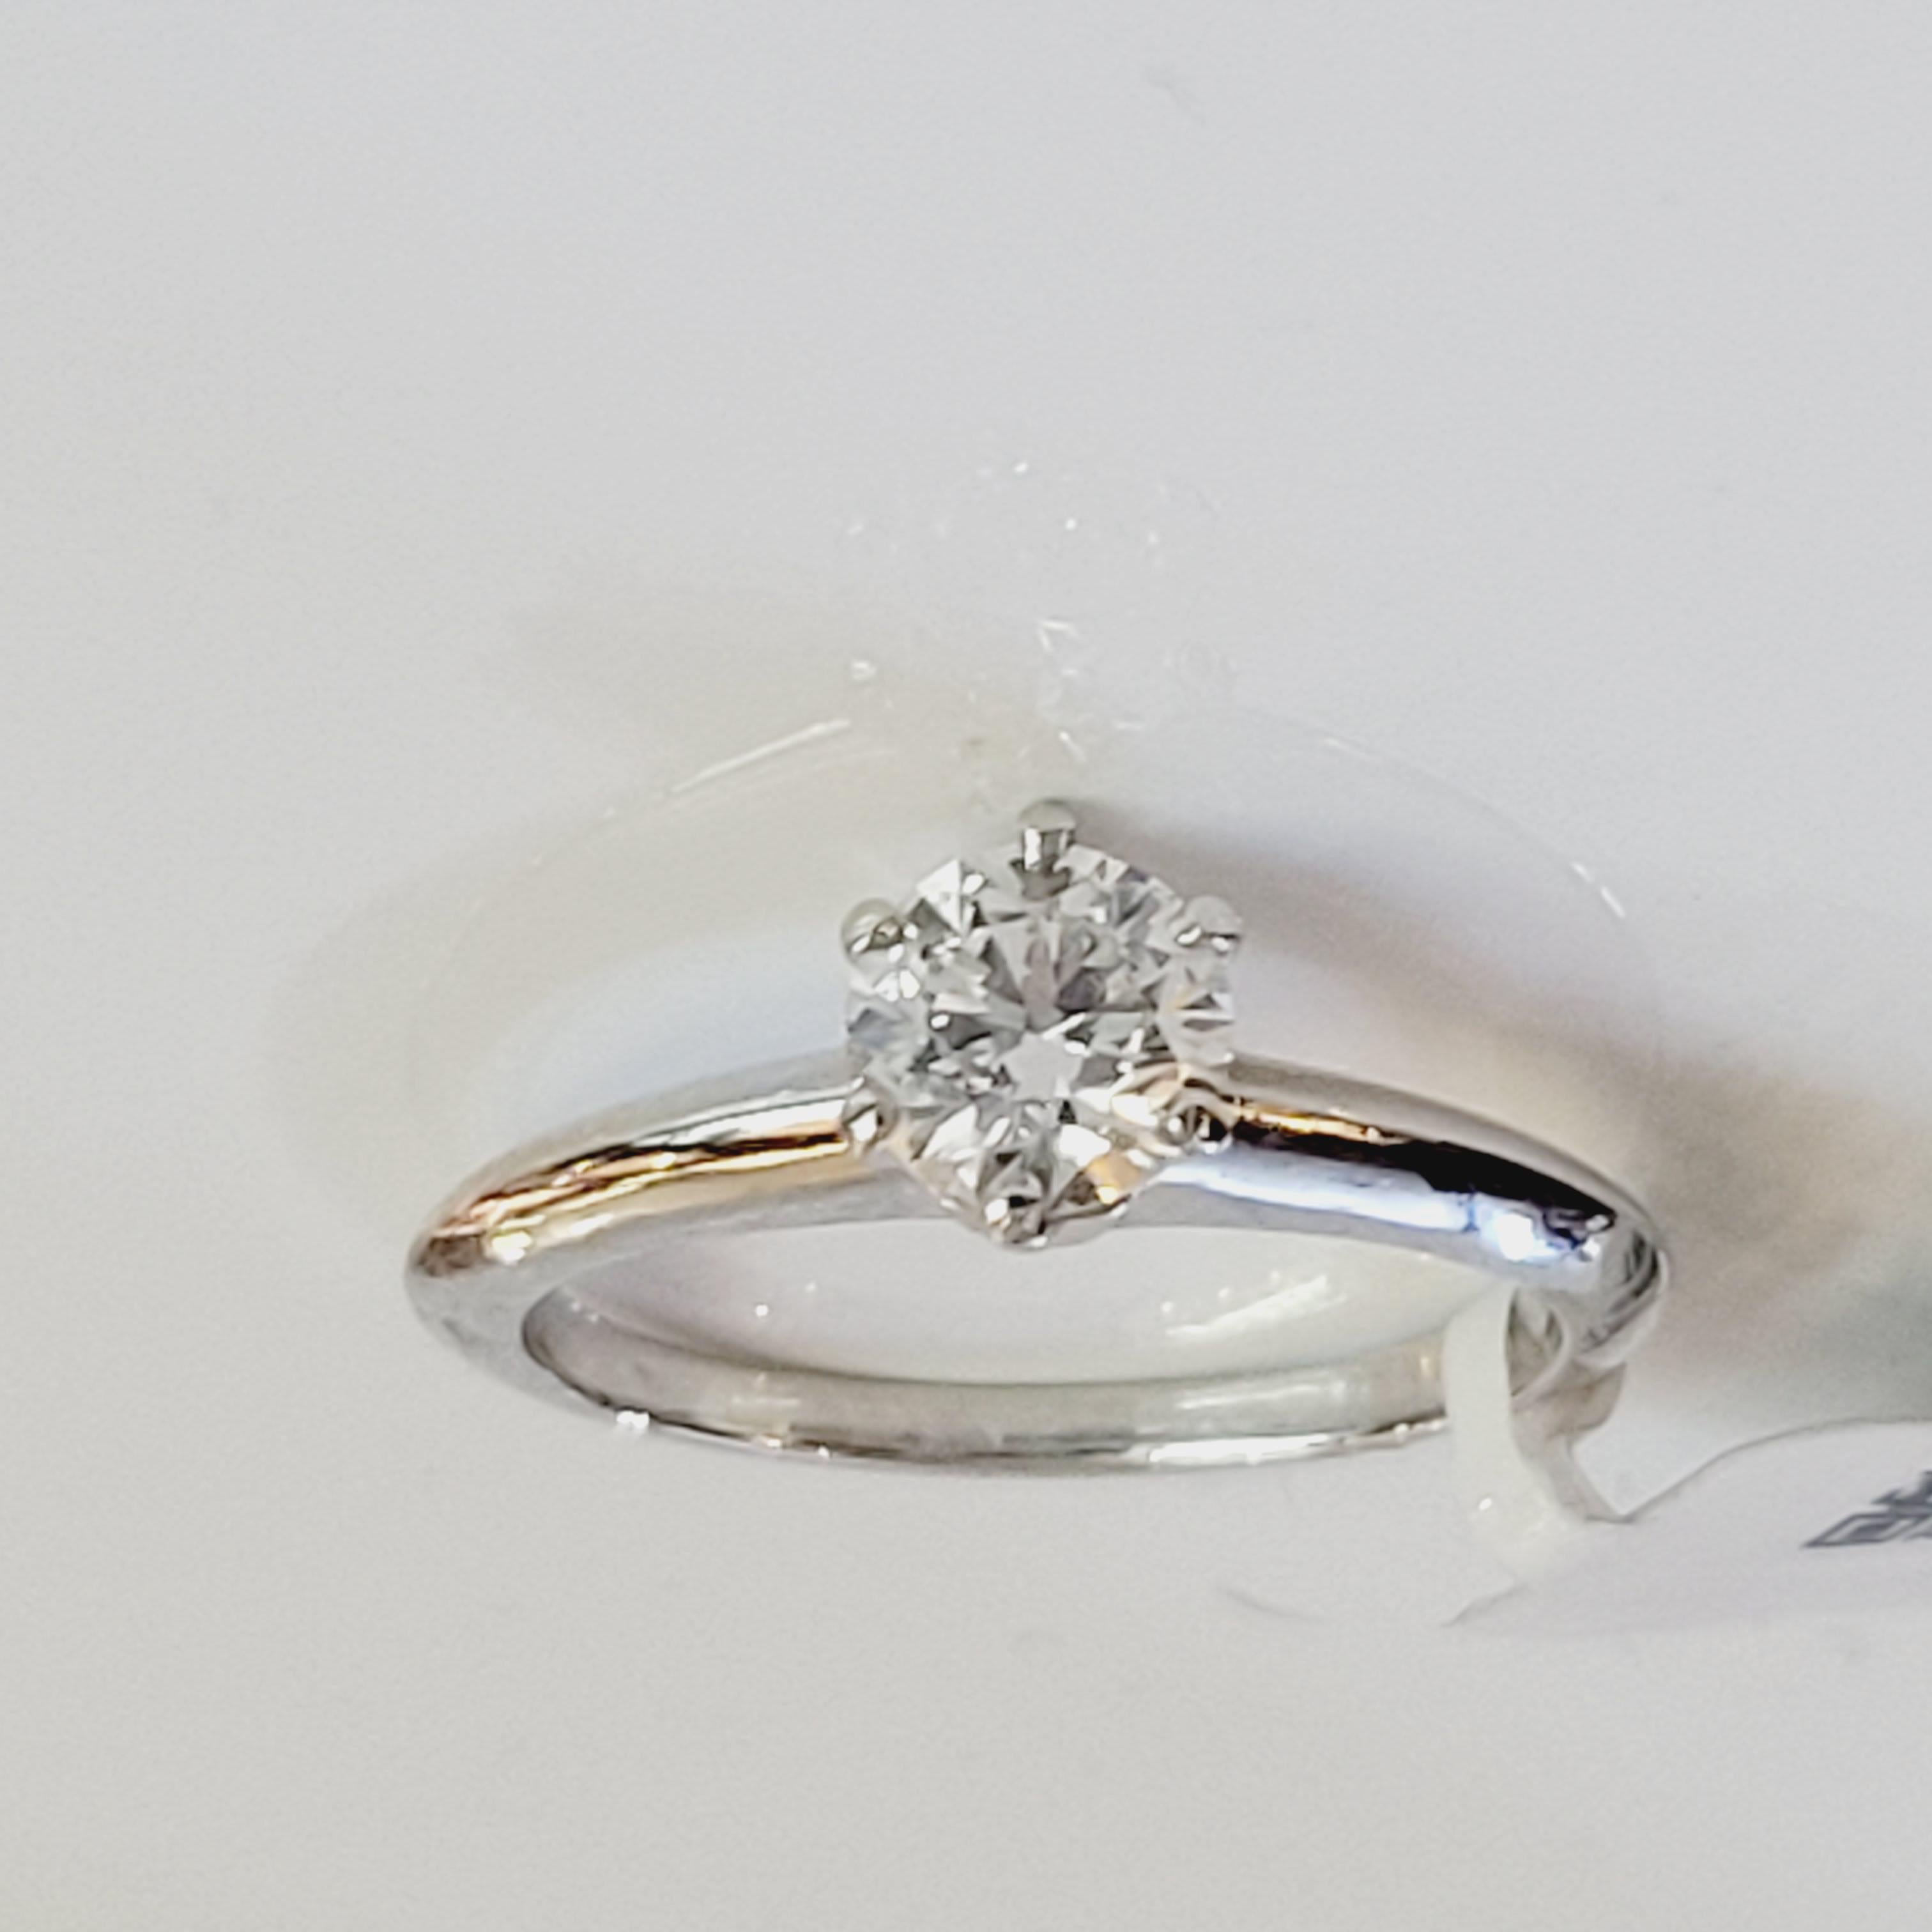  Tiffany & Co. .72 ct Diamond Engagement Ring Plat H VS1 Box & Papers

Tiffany & Co. solitaire engagement ring with a 0.72 ct single round brilliant cut diamond center stone. This Tiffany ring has the serial number of the diamond engraved inside the